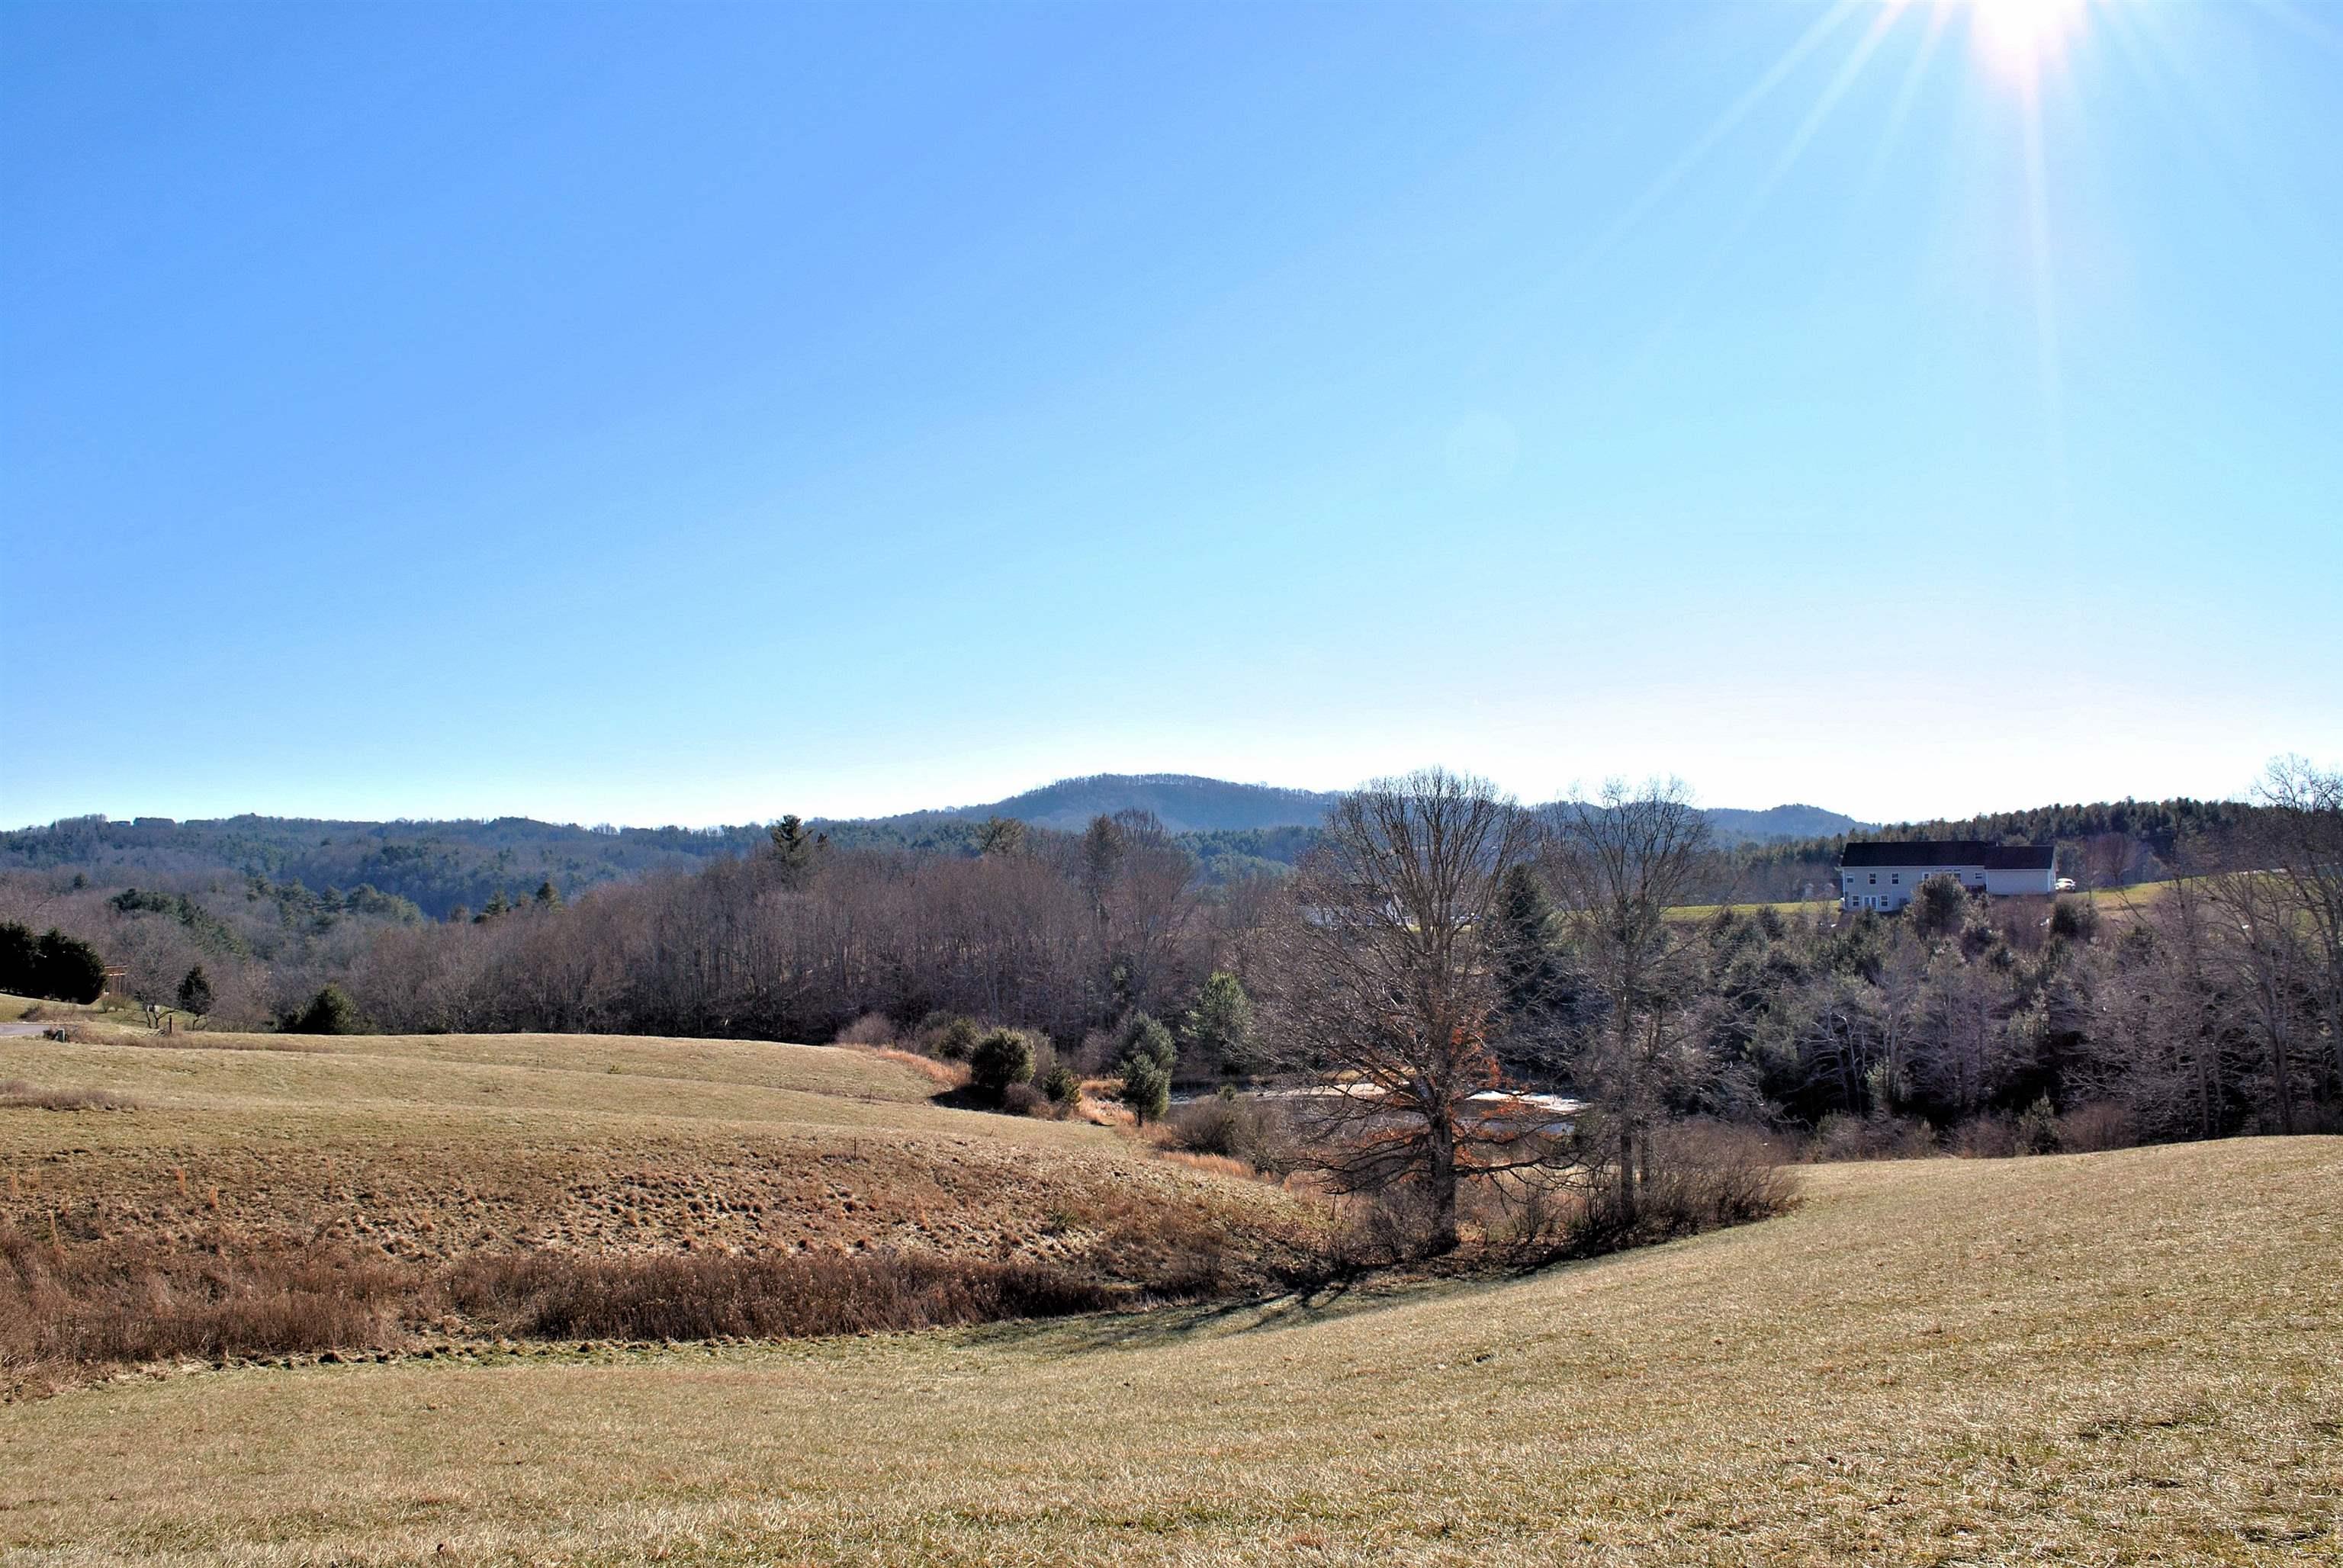 Build your dream on this open lot with great mountain views and pond frontage!  Property has High Speed Internet available with Fiber Optic Cable at the property so you can work from home!  The property has perk test completed for a 3 bedroom home.  Conveniently located within 15 to 20 minutes to I-81, Christiansburg, Blacksburg, VT, Radford, RU, Carilion Hospital, Montgomery Regional Hospital, etc... Country living at is finest!  Call for a private showing!